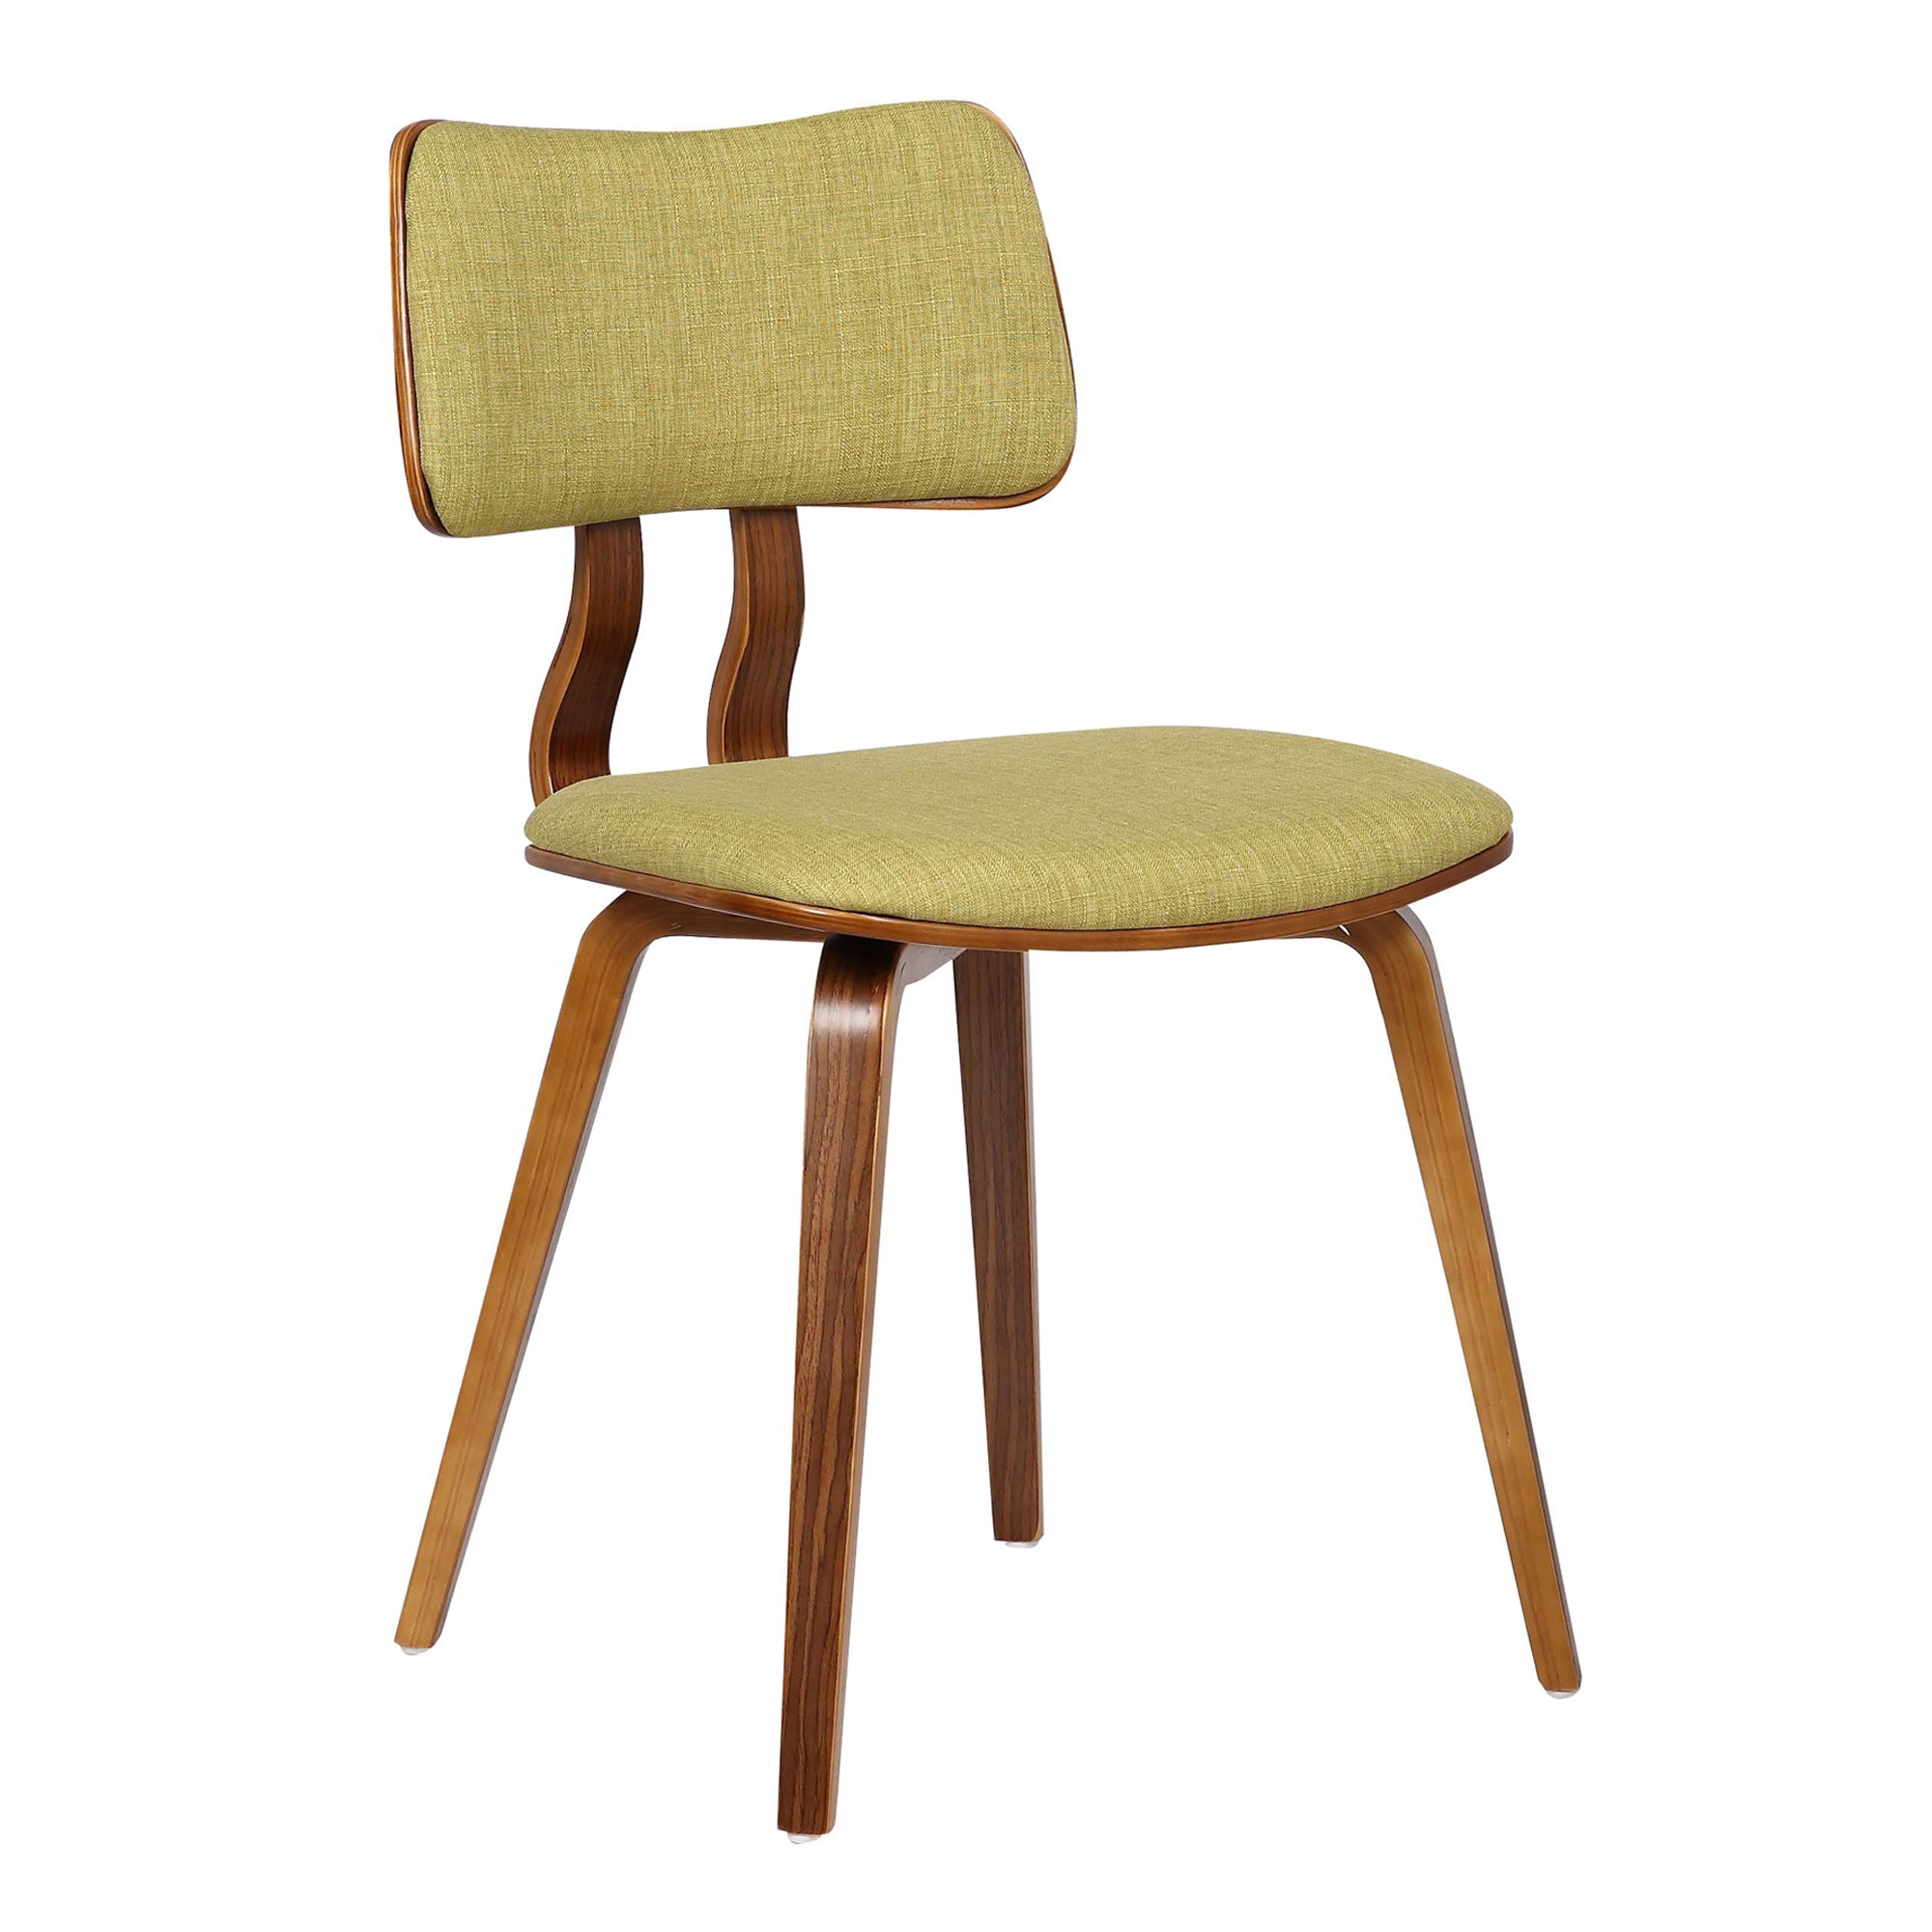 Armen Living Lcjasiwagreen Jaguar Mid-century Dining Chair In Walnut Wood And Green Fabric